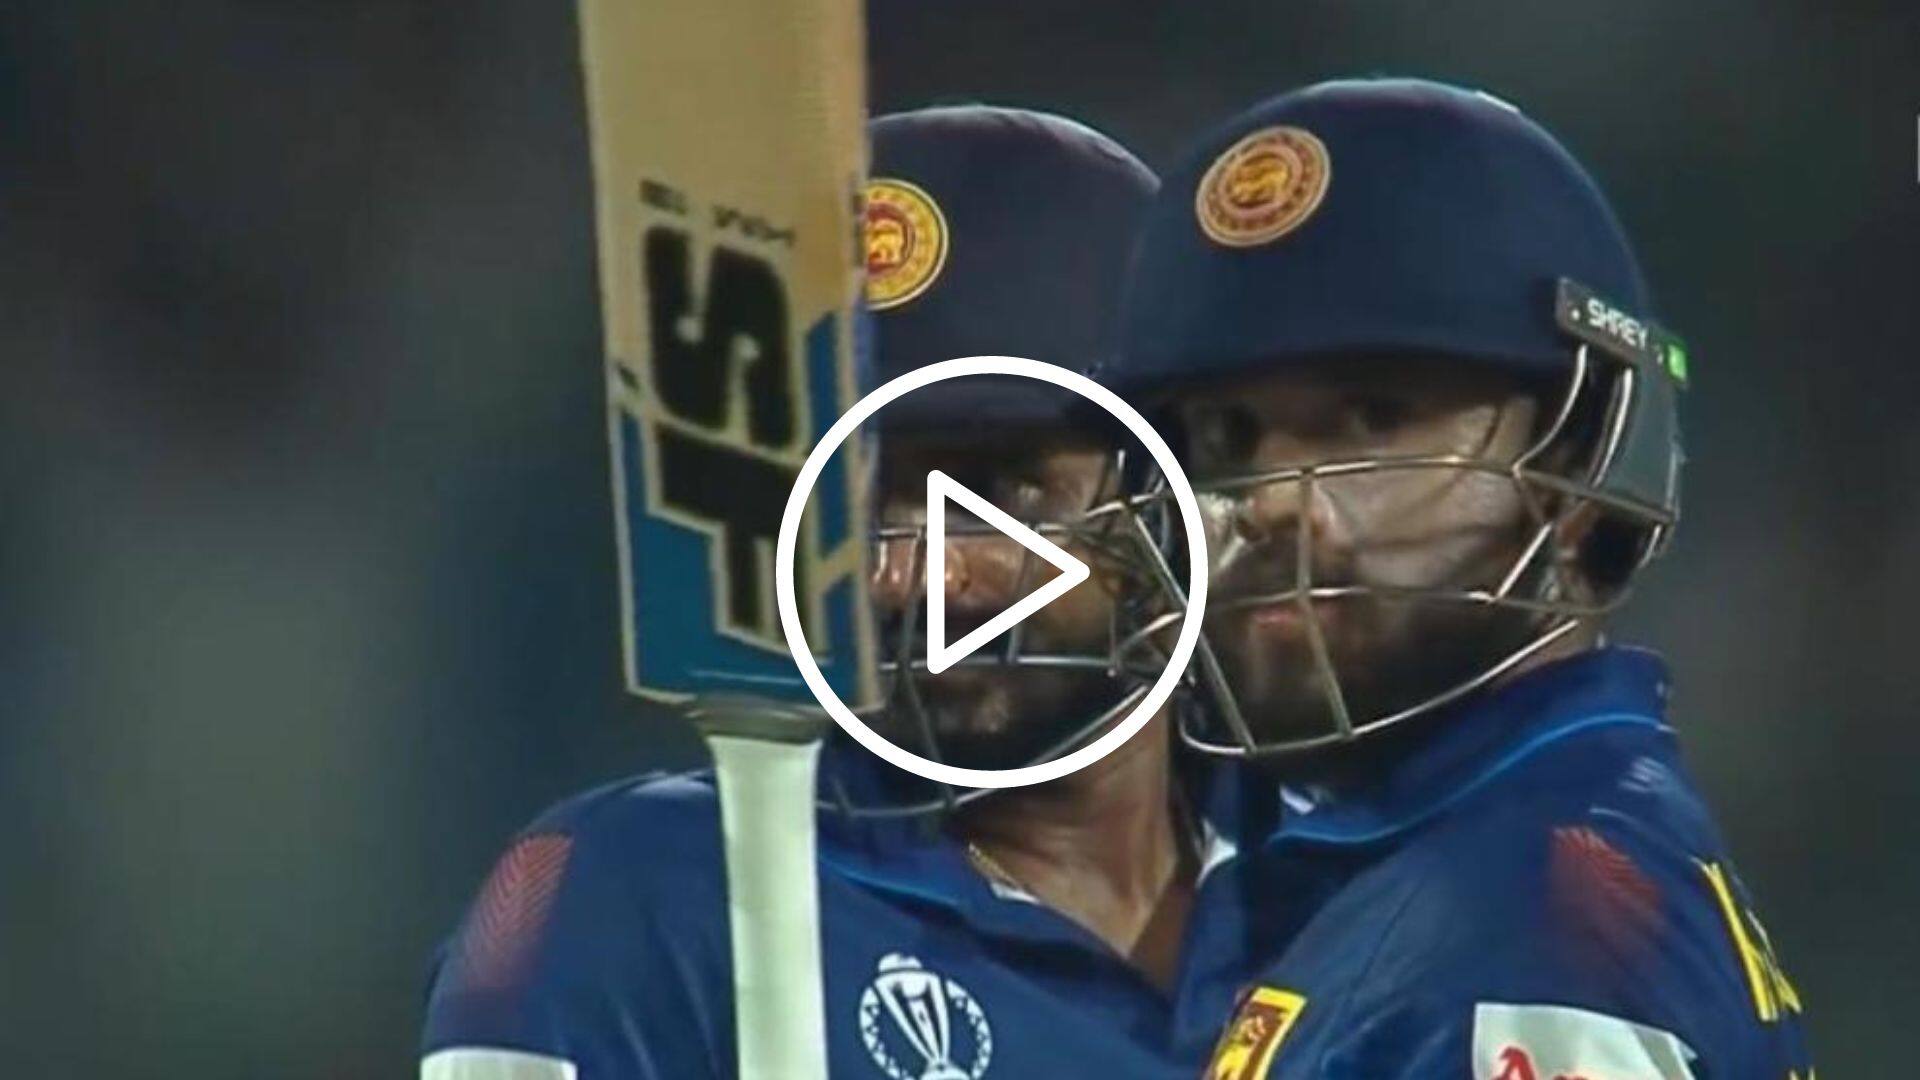 [Watch] Mendis Gets To His 25-Ball Fifty With A Monstrous Six Against Marco Jansen